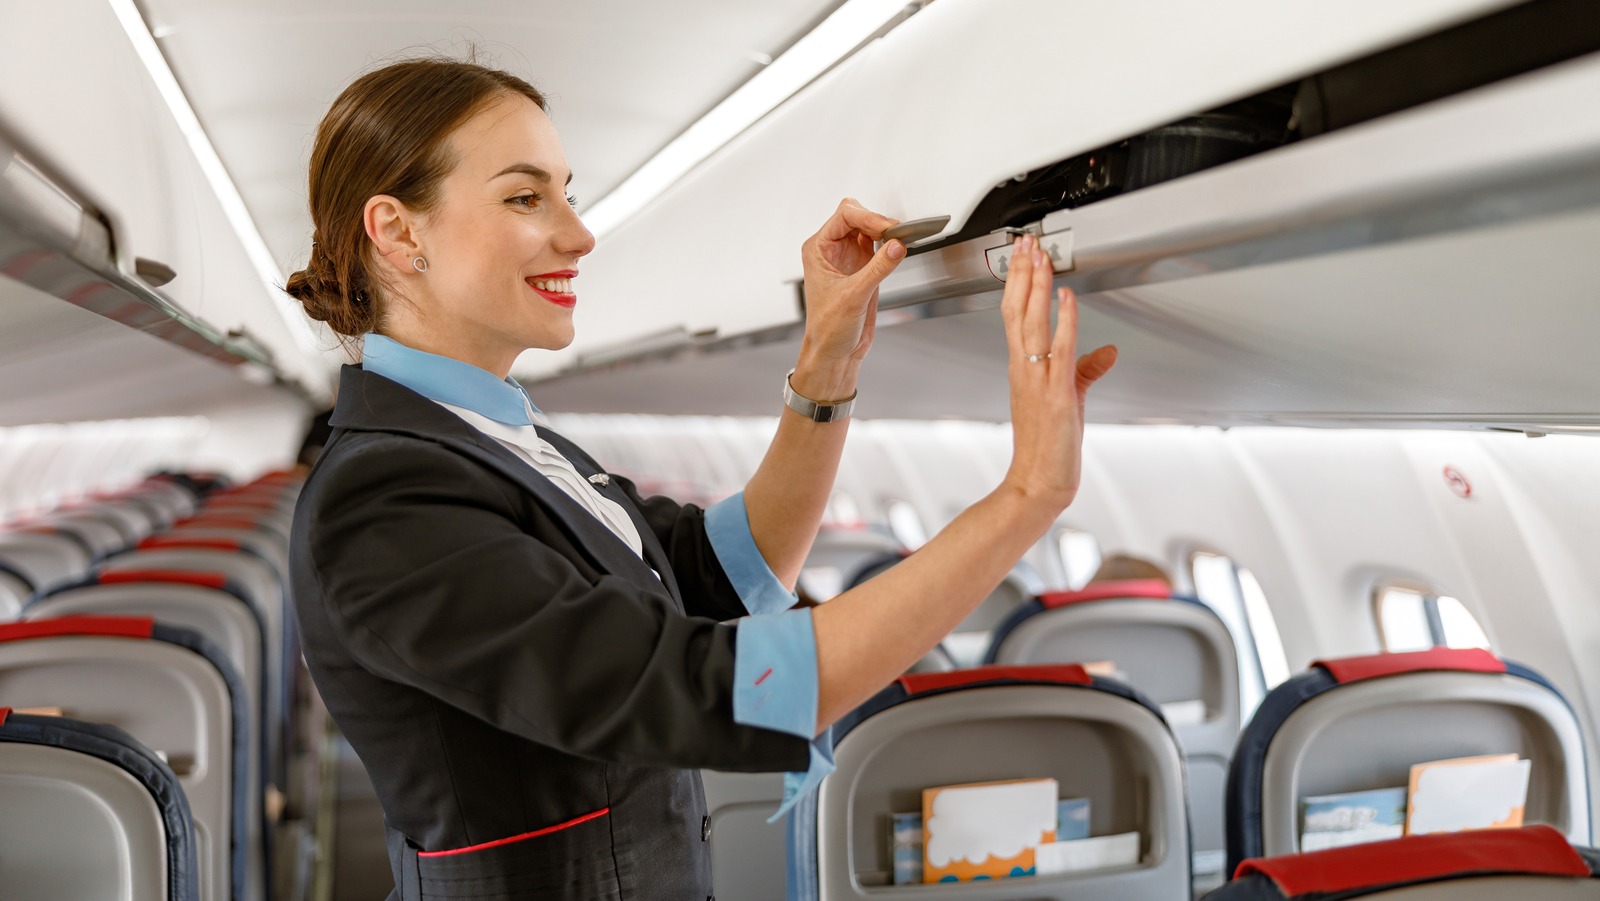 Flight attendants work unpaid about one week a month, according to new  survey